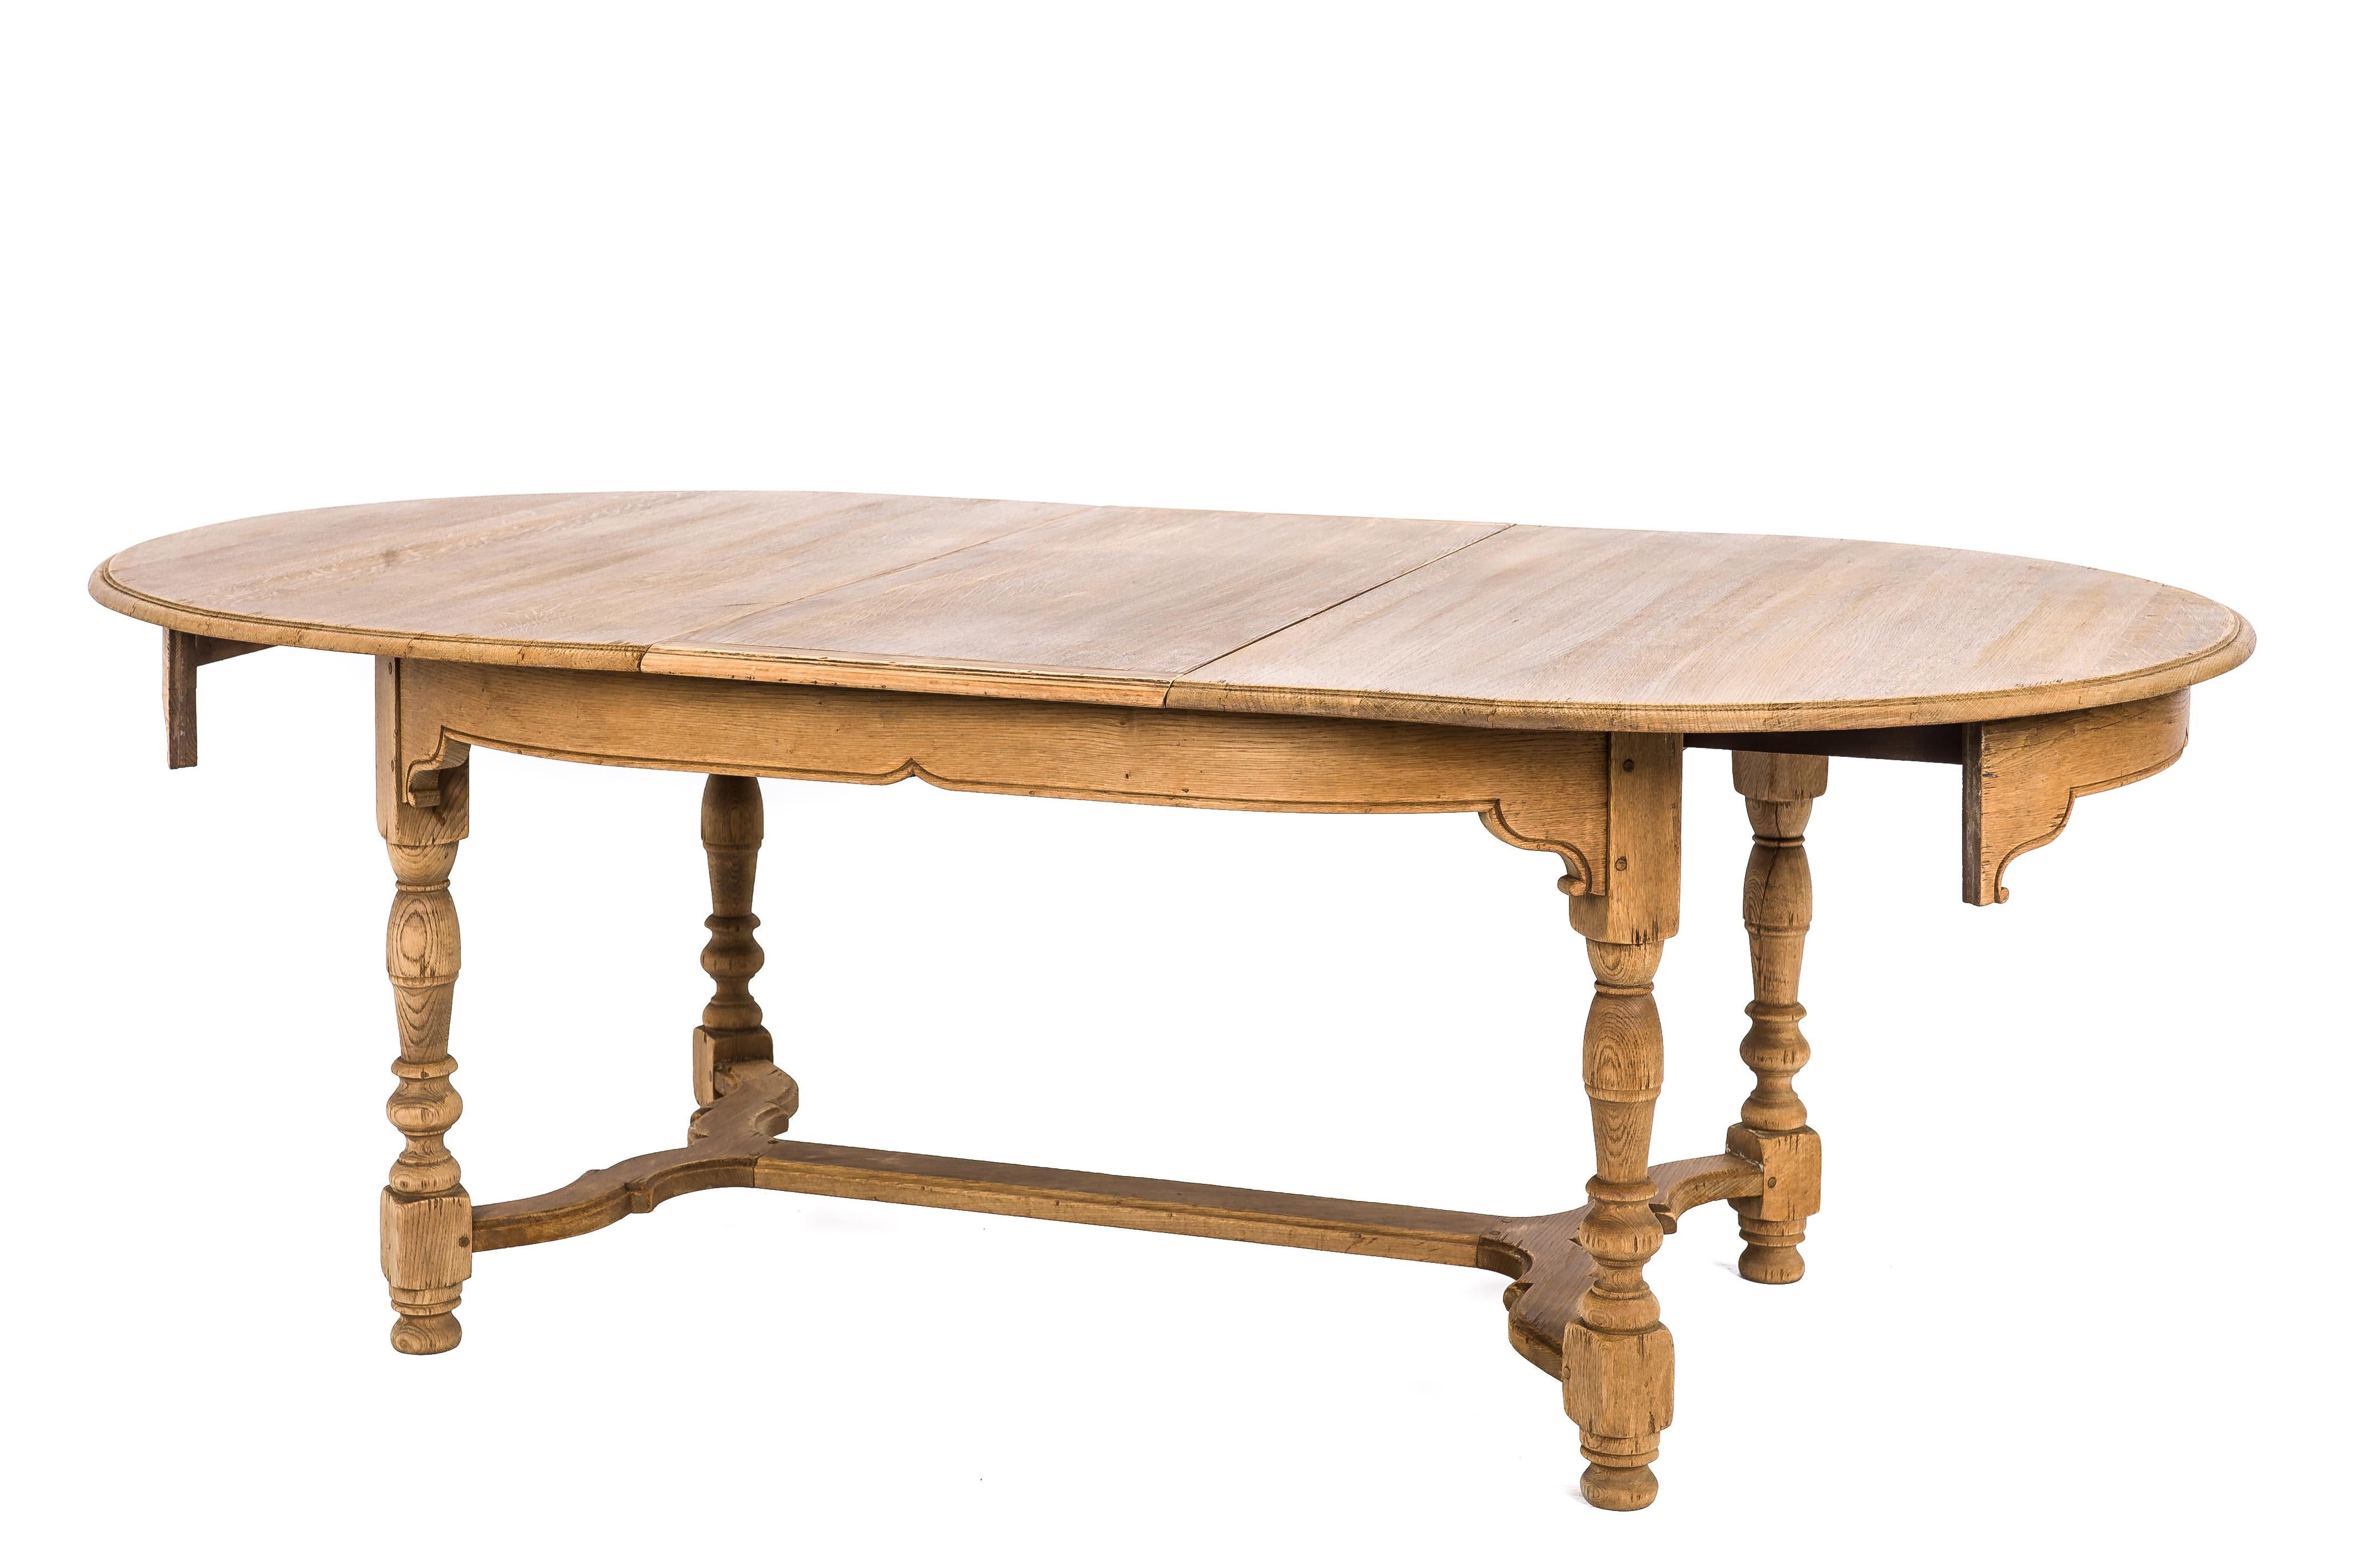 This beautiful rustic table was made in France in the department of Sarthe in the 1960s. The table was made in French summer oak in Louis Philippe style. It has turned legs joined by a scrolled stretcher. The table can be extended by inserting two